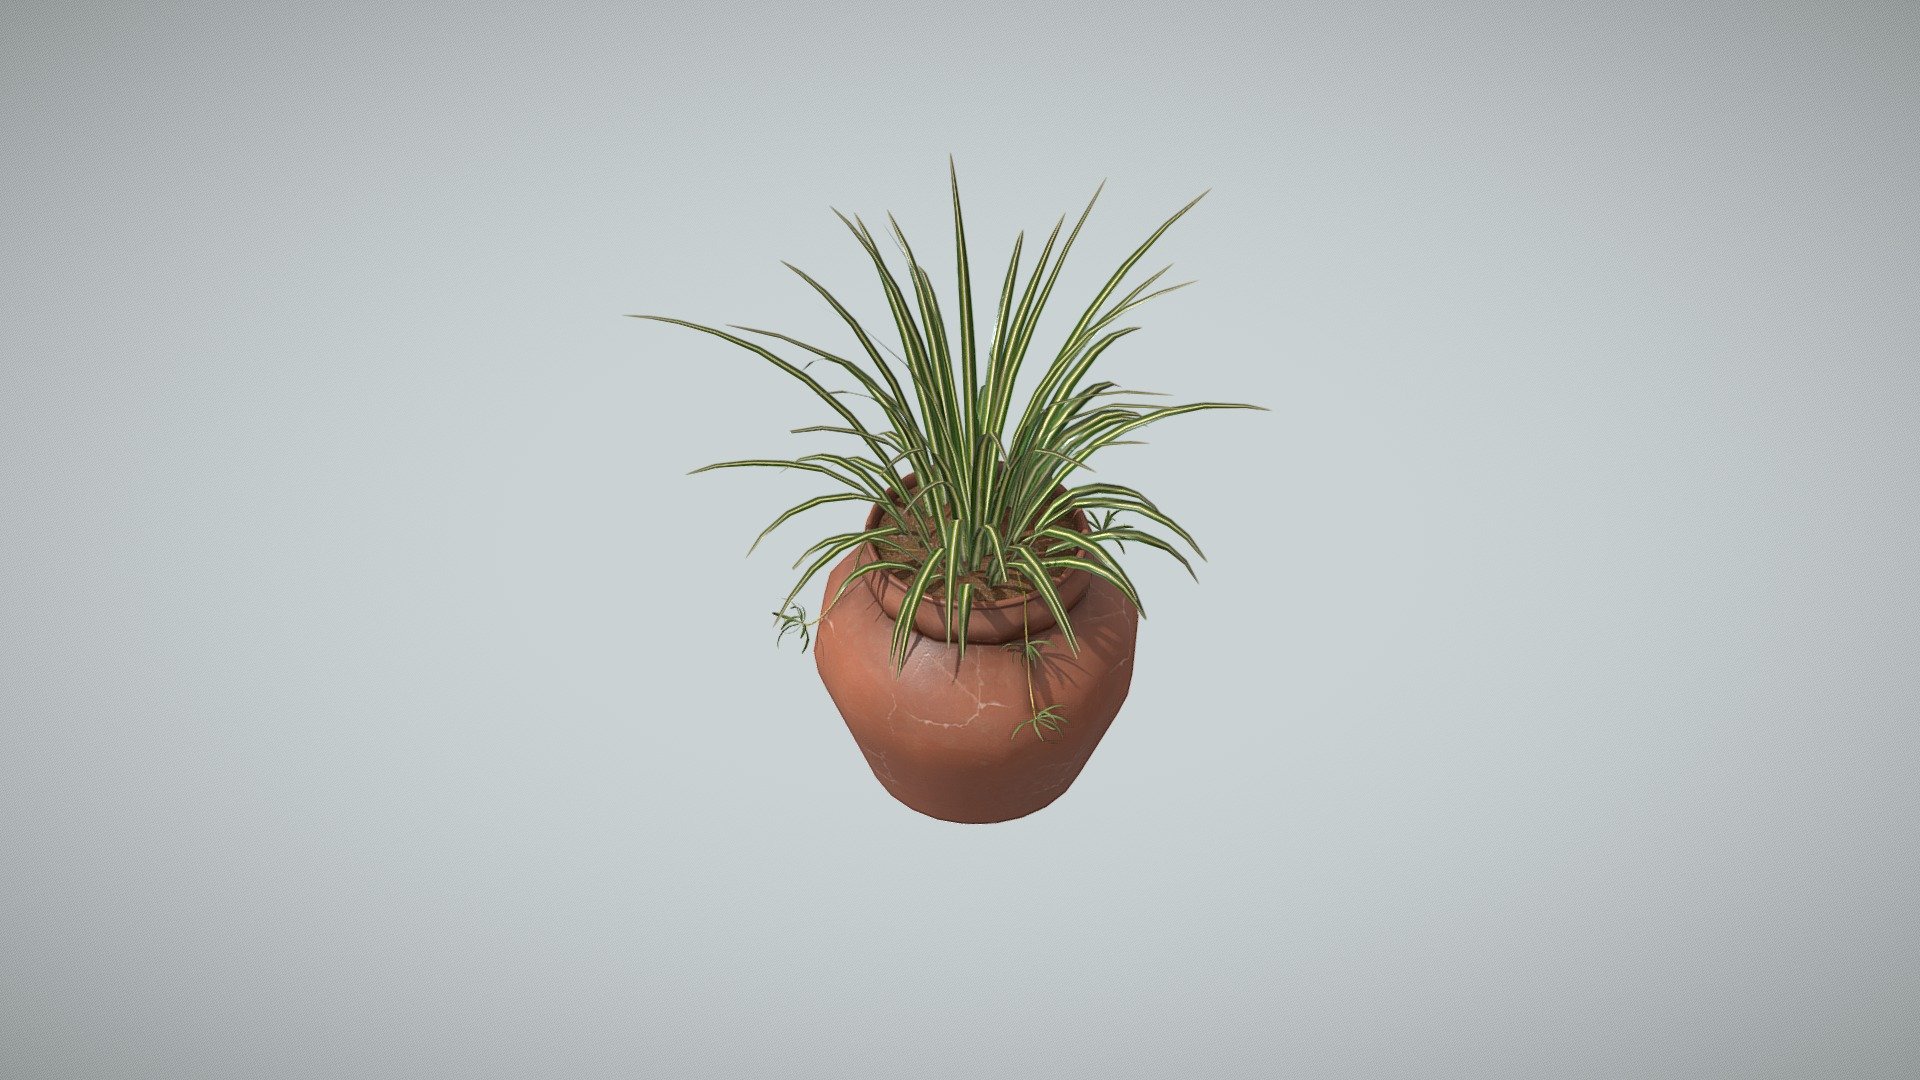 Low poly asset perfectly optimized and mapped to represent a higher polygon density. You can use it in VR, smartphone games, or environments where few polygons are needed. Intended for use in graphics engines such as Unity and Unreal Engine, with the current configuration of PBR materials.

This prop belongs to an vegetation theme pack, if you need a specific prop let us know and we will add it for sale.

Developed by Outlier Spa 3d model